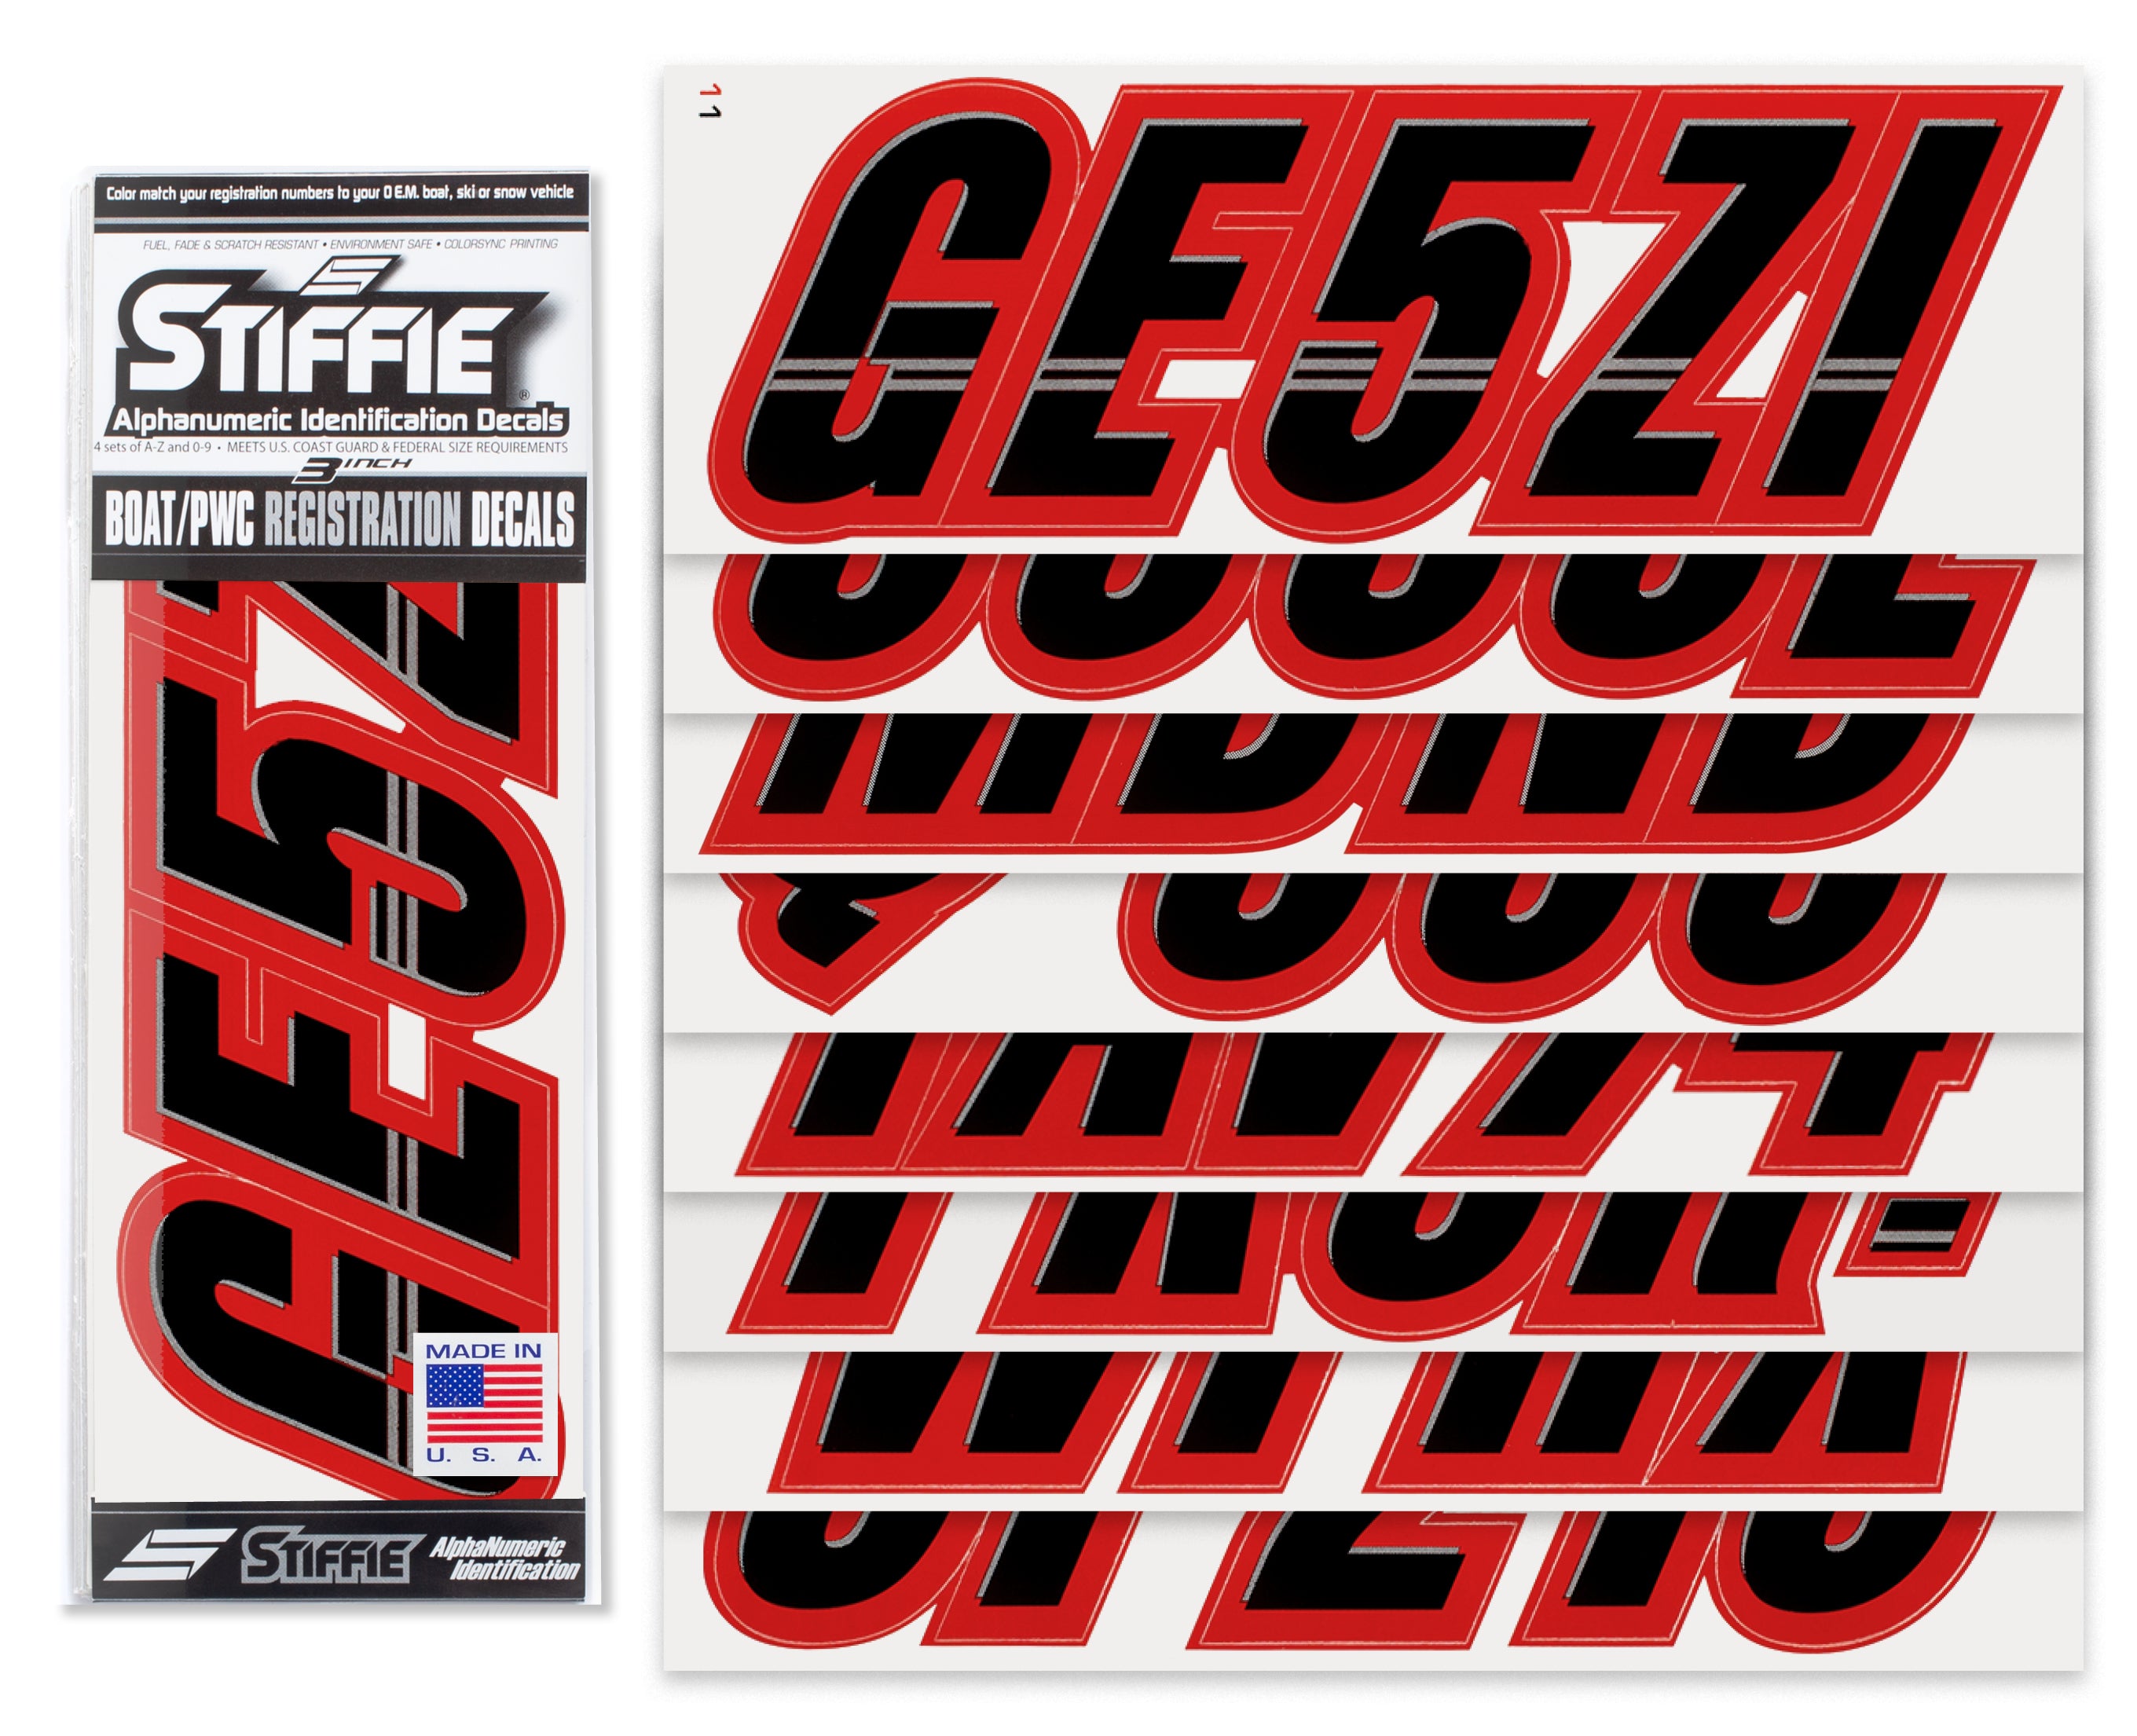 Stiffie Techtron Black/Red 3" Alpha-Numeric Registration Identification Numbers Stickers Decals for Boats & Personal Watercraft